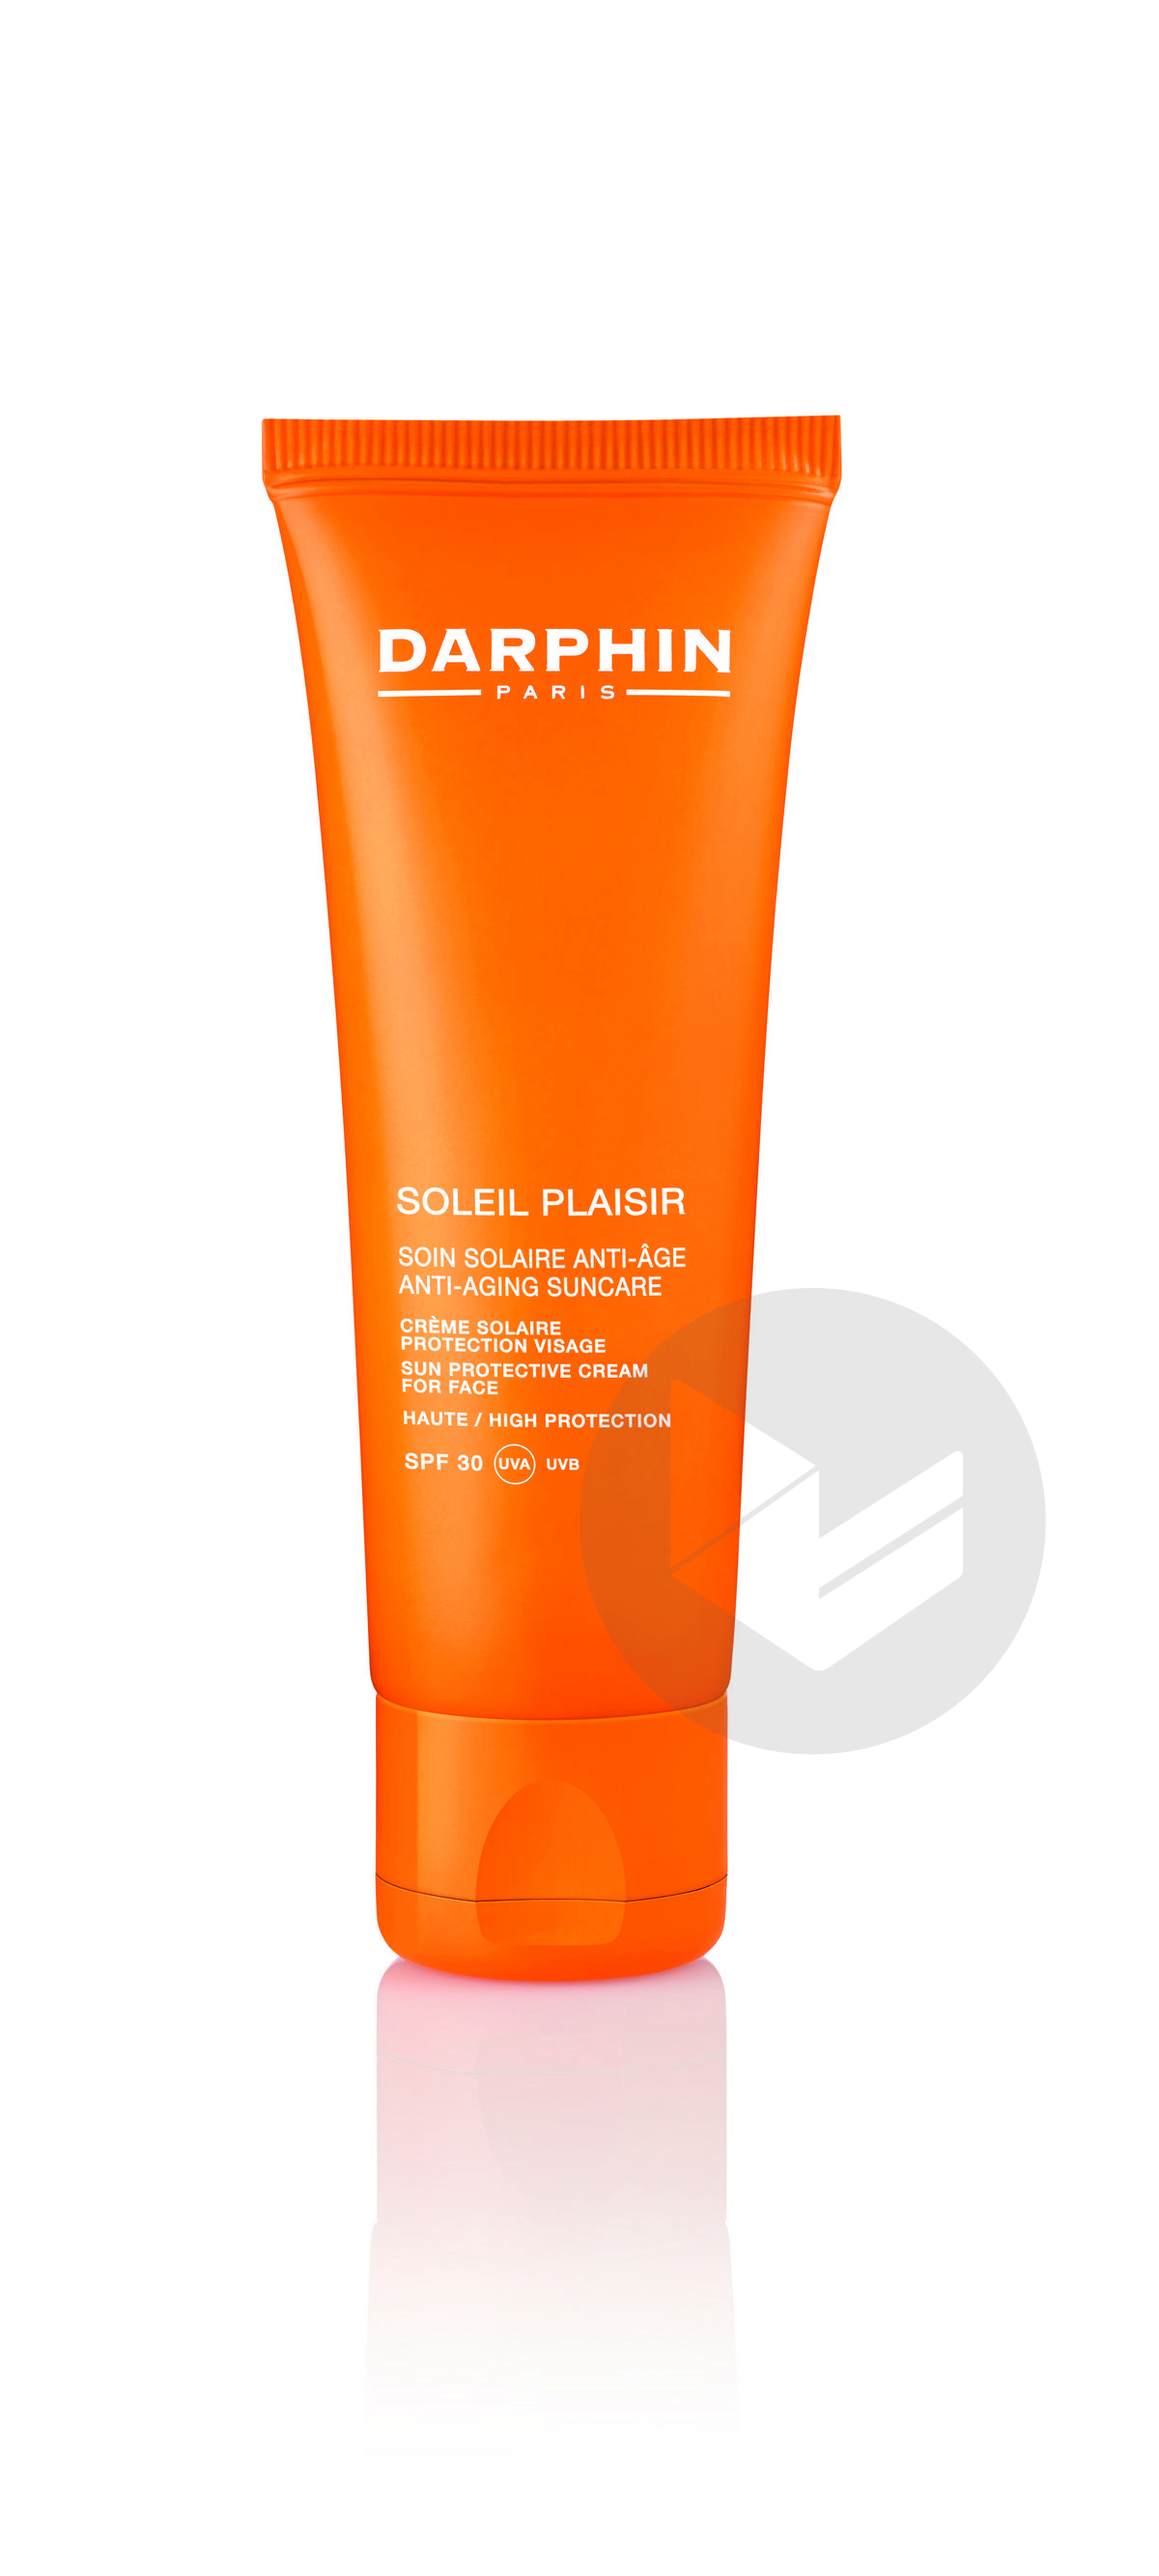 Soin Solaire Anti-âge Visage SPF30 50ml